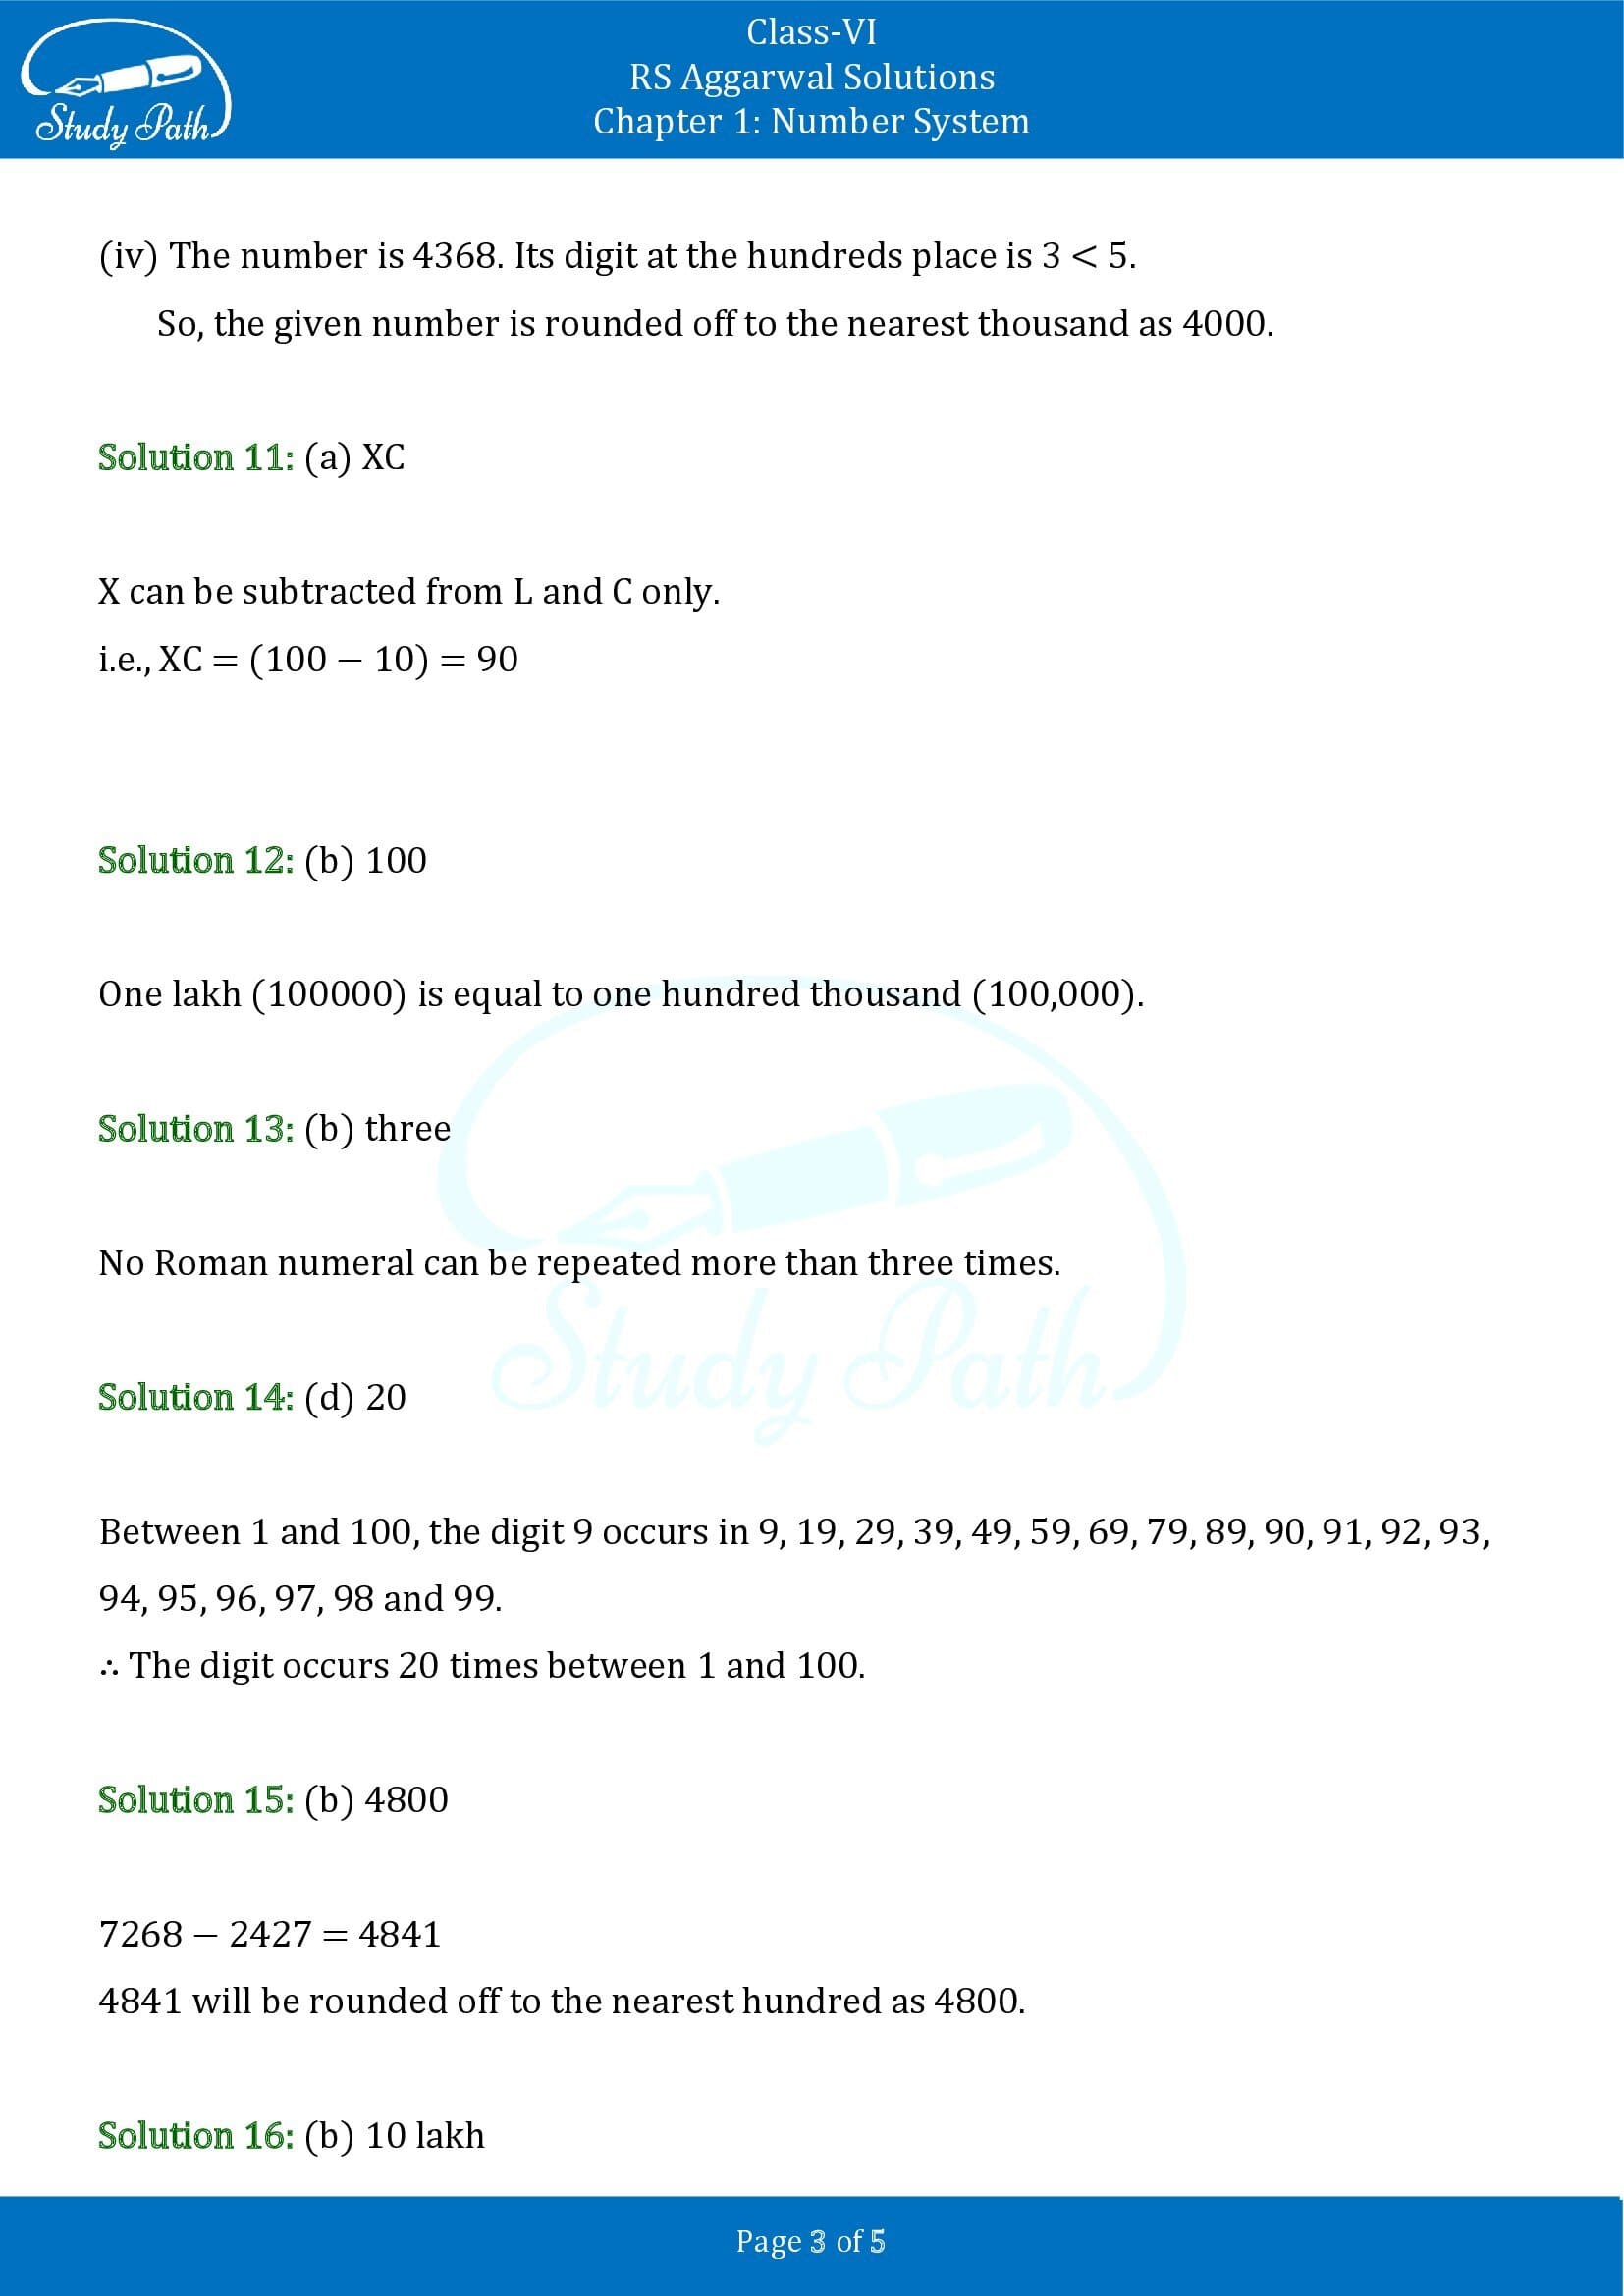 RS Aggarwal Solutions Class 6 Chapter 1 Number System Test Paper 00003